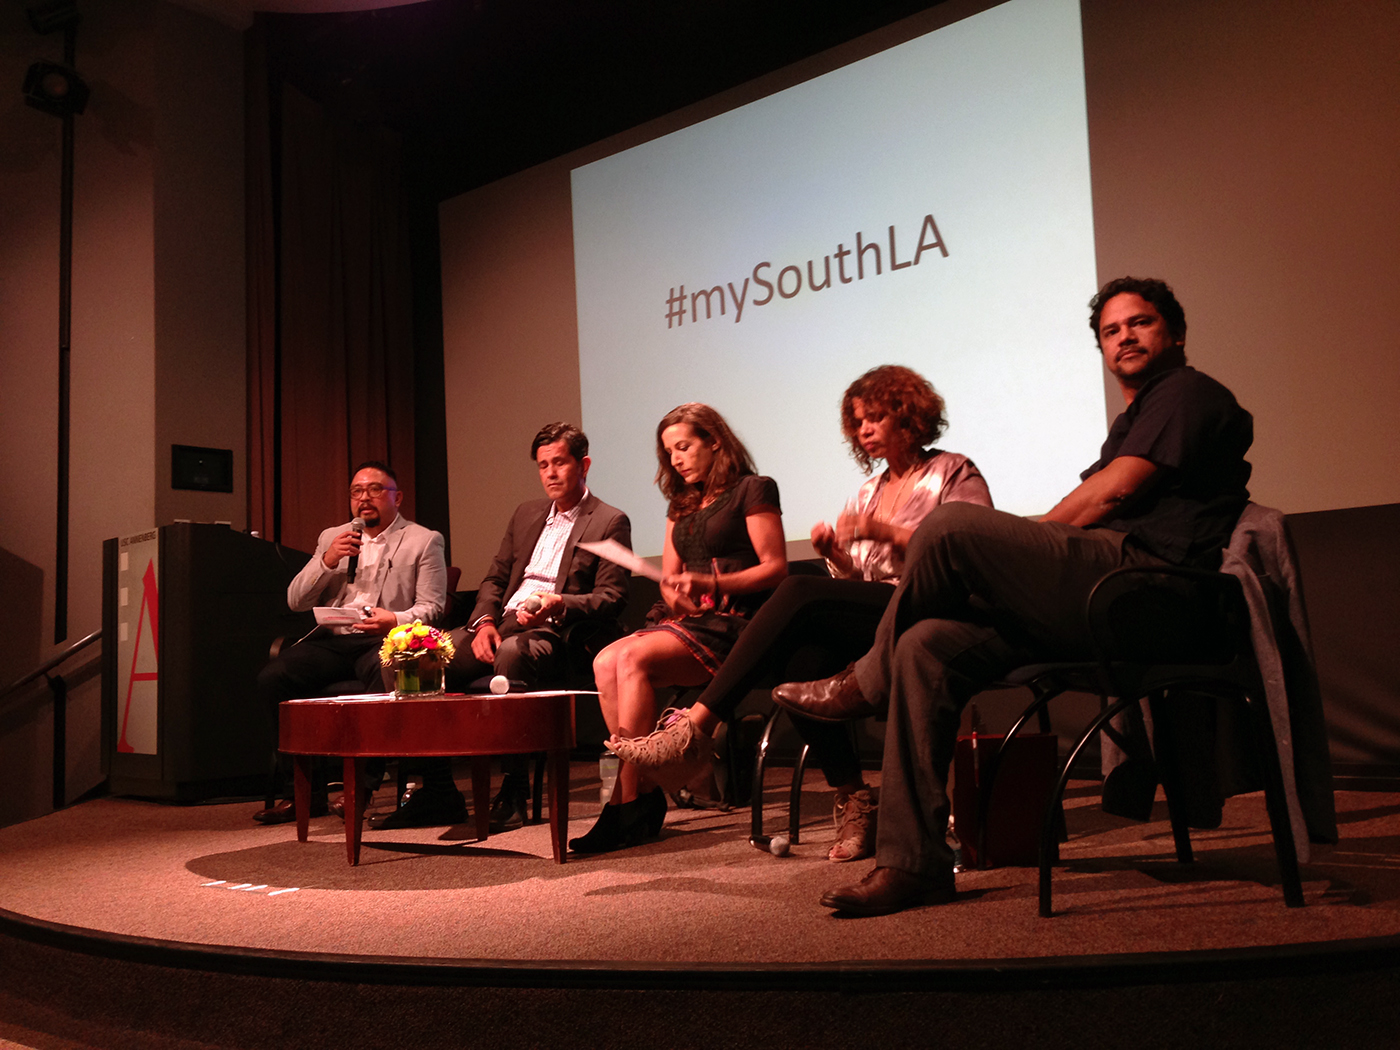 Texas A&amp;M University communication professor George Villanueva sits on a stage along with four other speakers while moderating a panel of South Los Angeles community leaders and media producers during an event on the University of Southern California campus